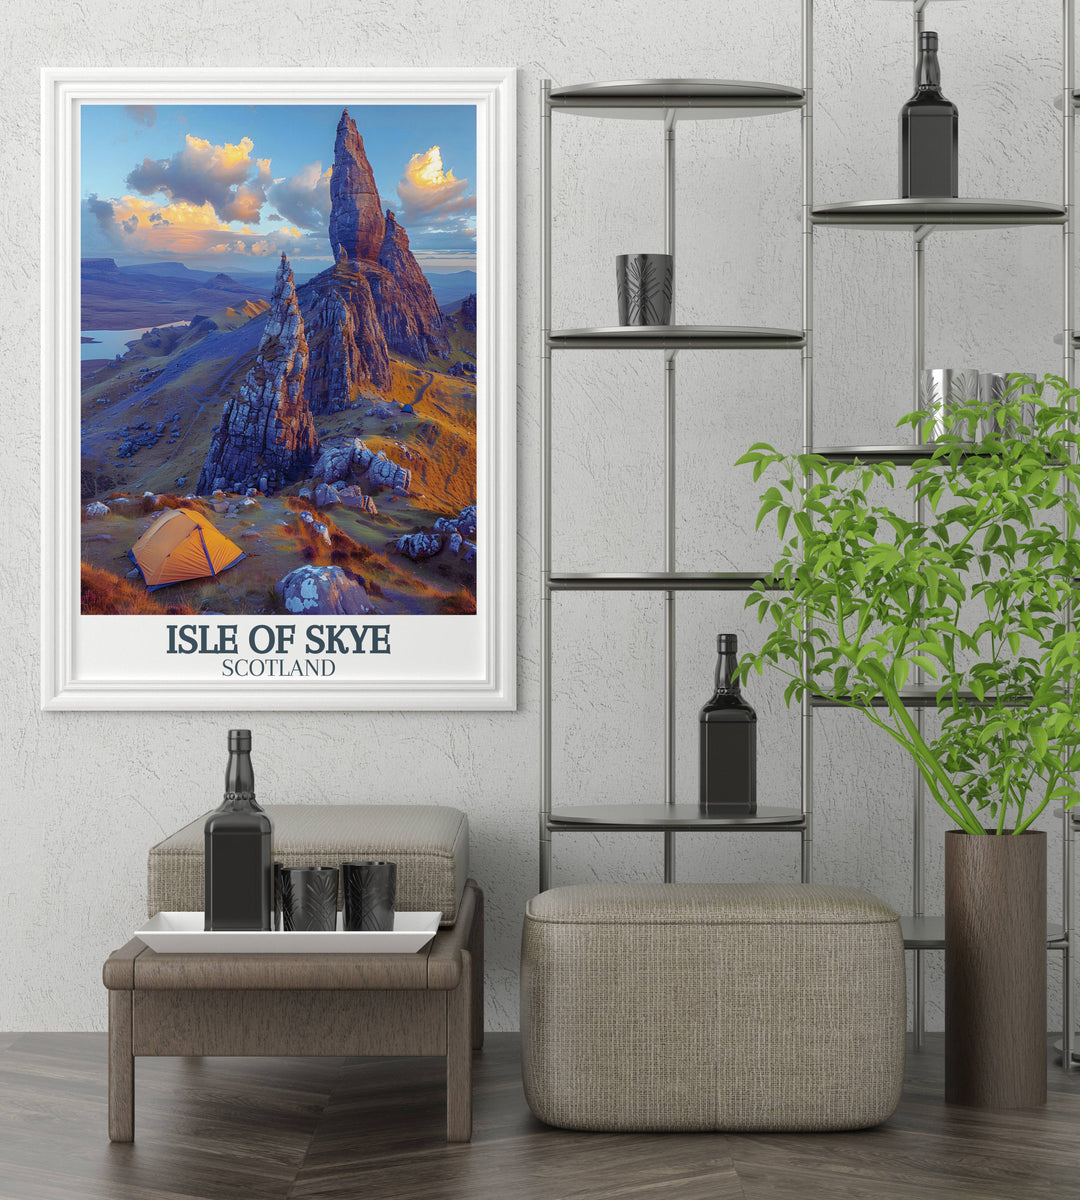 Isle of Skye Poster, a mesmerizing view of Scotland’s natural beauty, perfect as a focal point in any modern or rustic interior